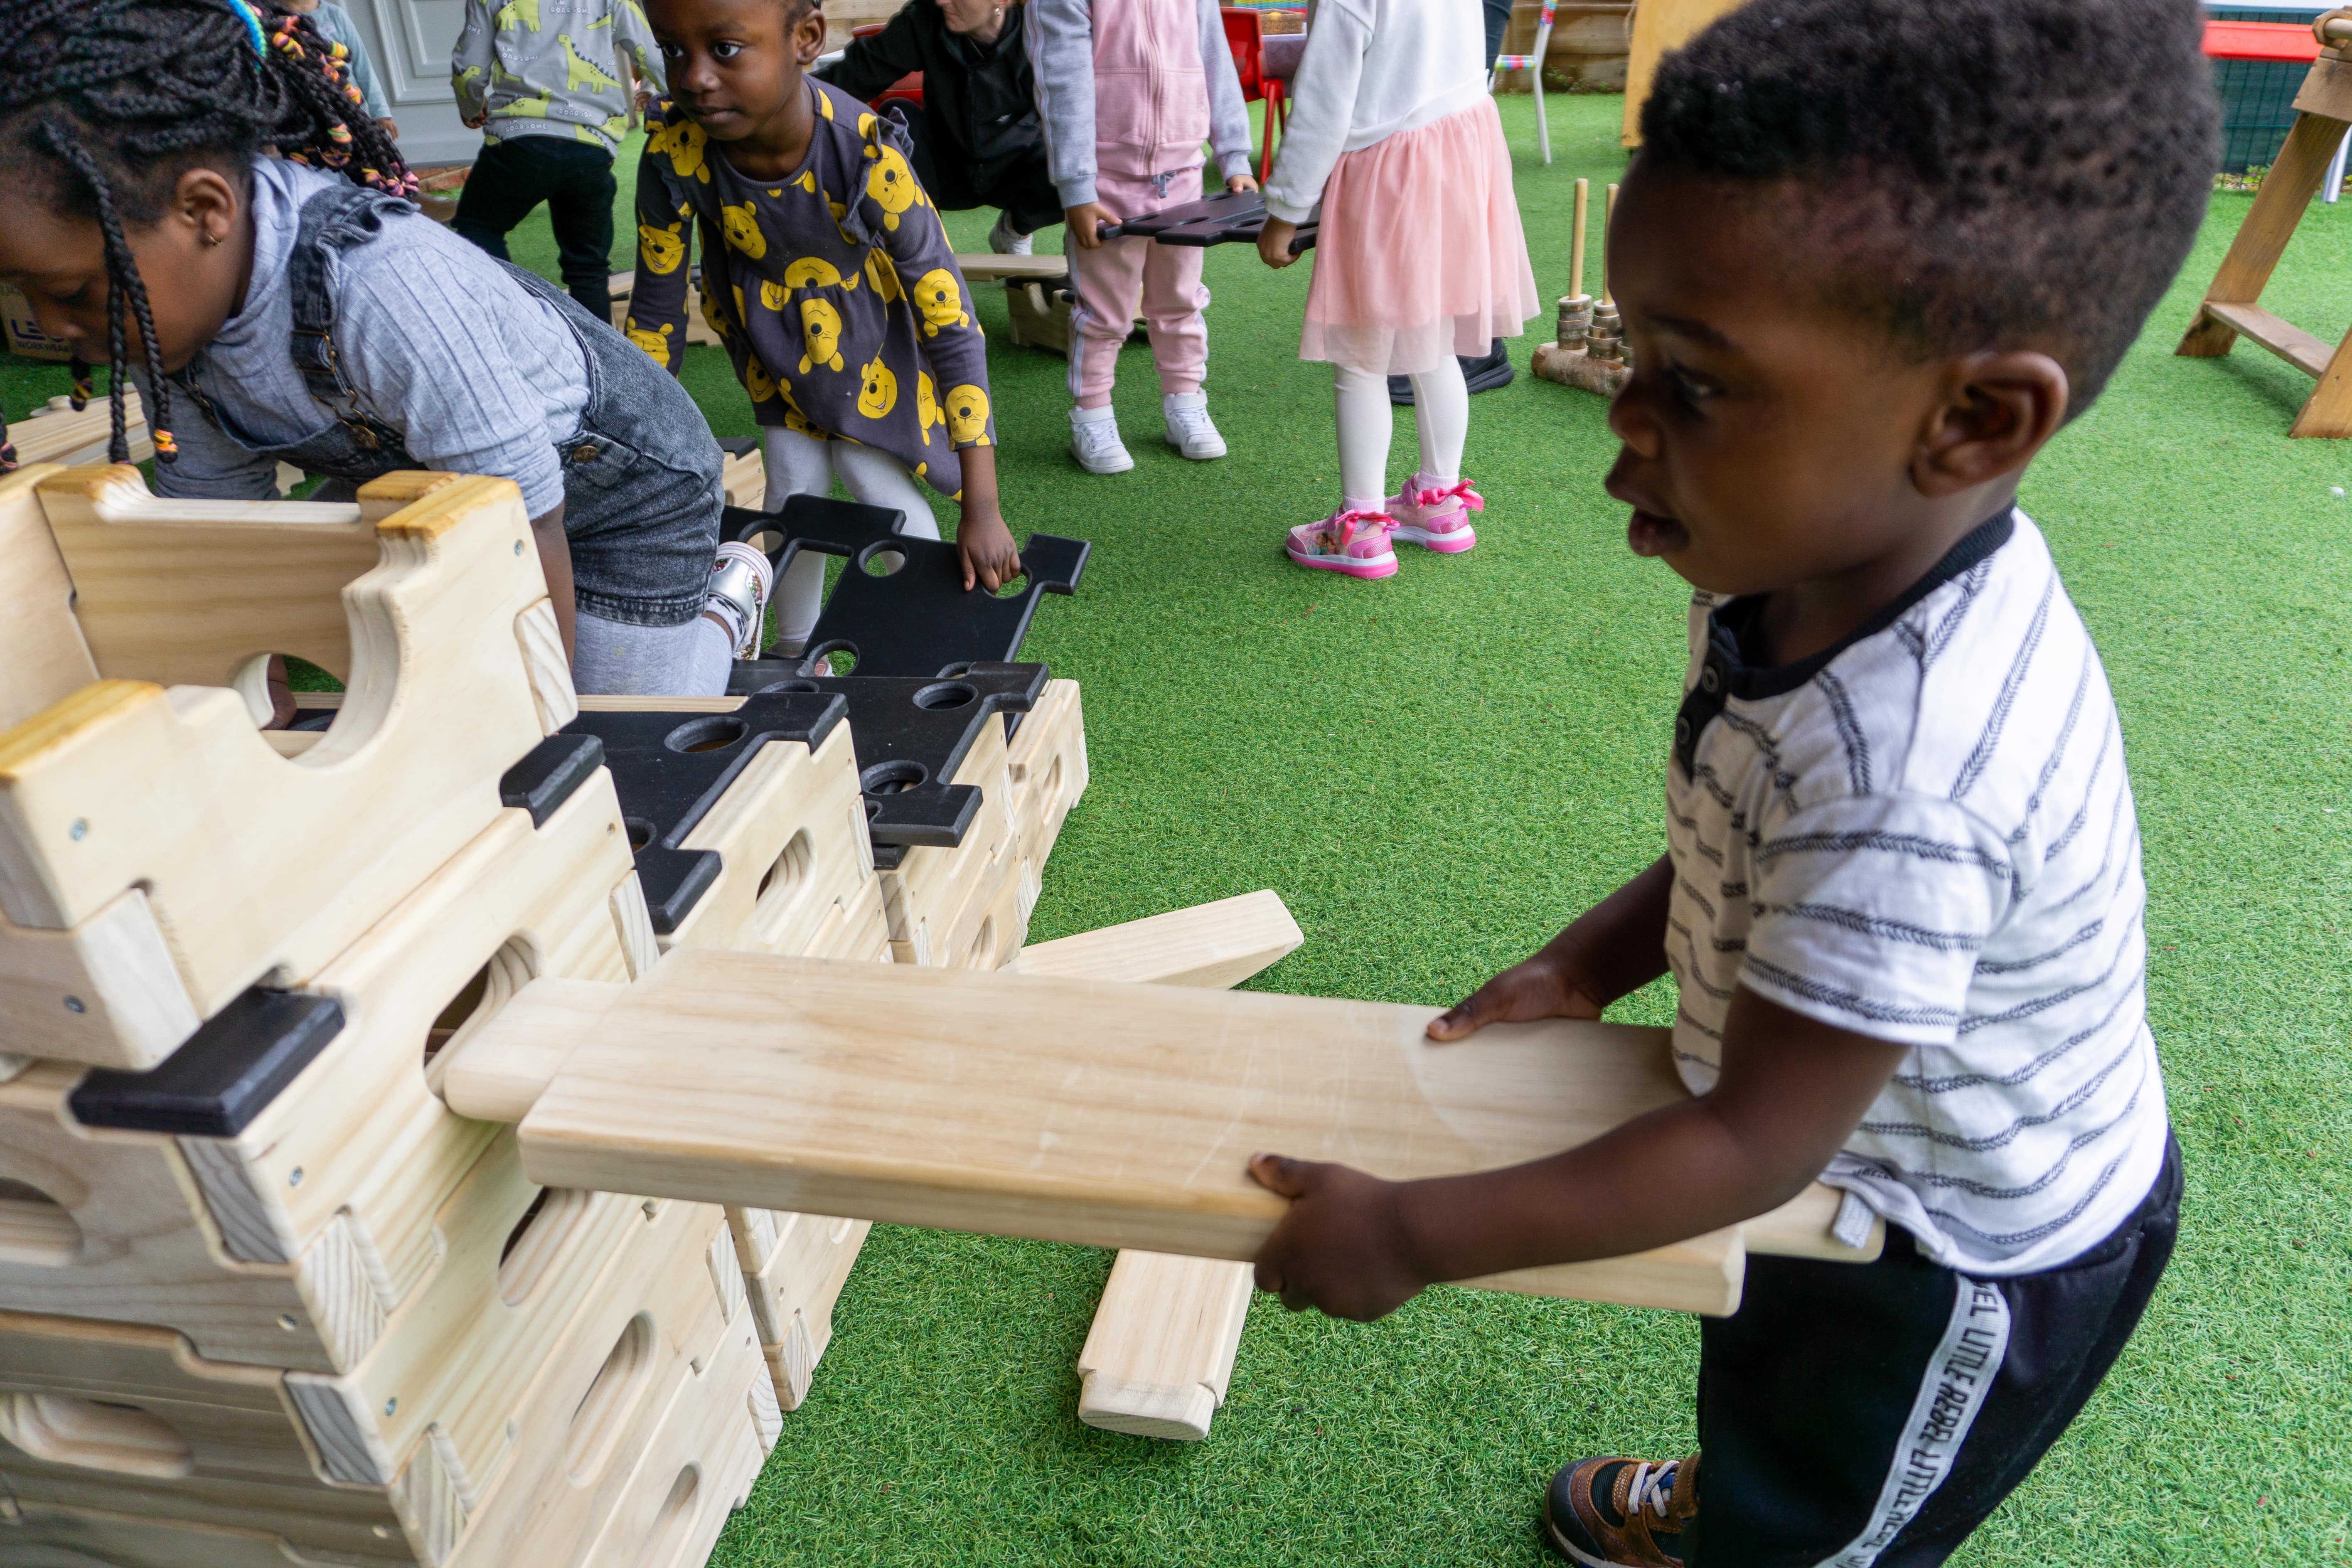 A child is inserting a wooden plank into a wooden block. He is focused on trying to insert the wooden plank perfectly into the whole, allowing it to connect strongly. A group of children behind are watching and collecting other wooden planks and blocks to use.